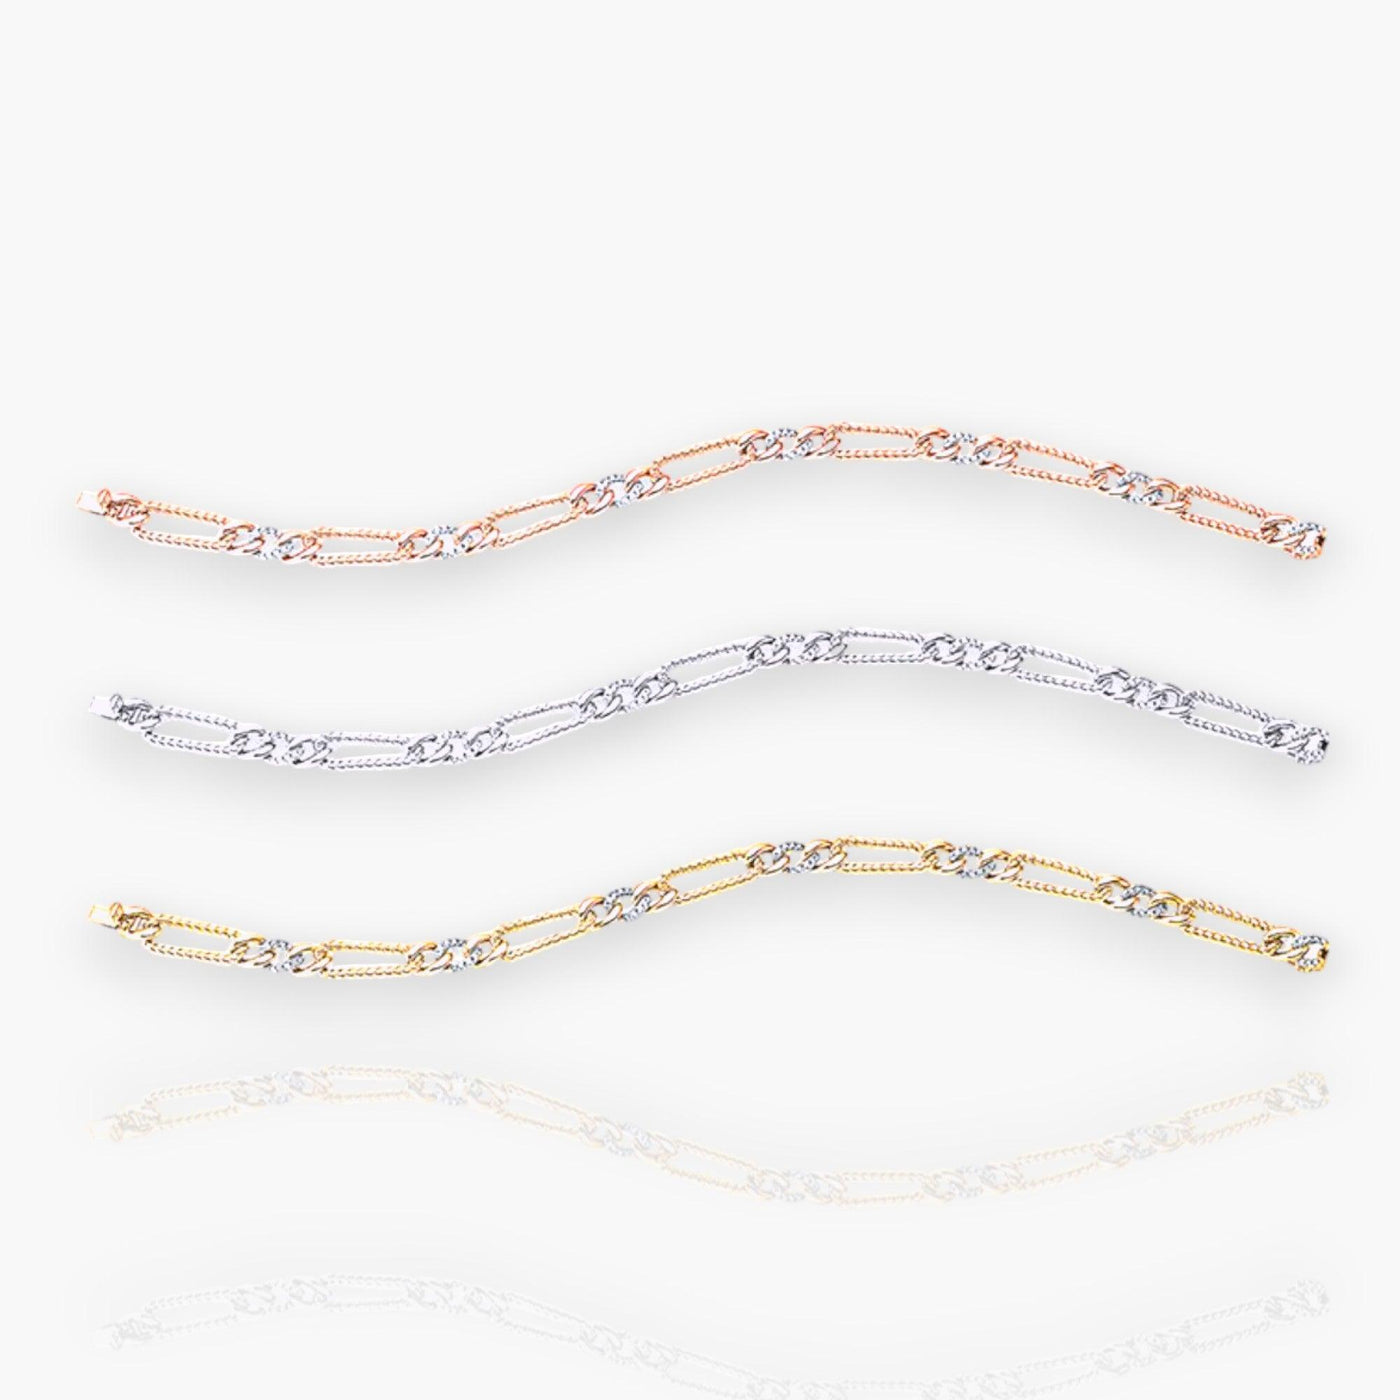 Chain Bracelet - In Yellow, White or Rose Gold - Moregola Fine Jewelry